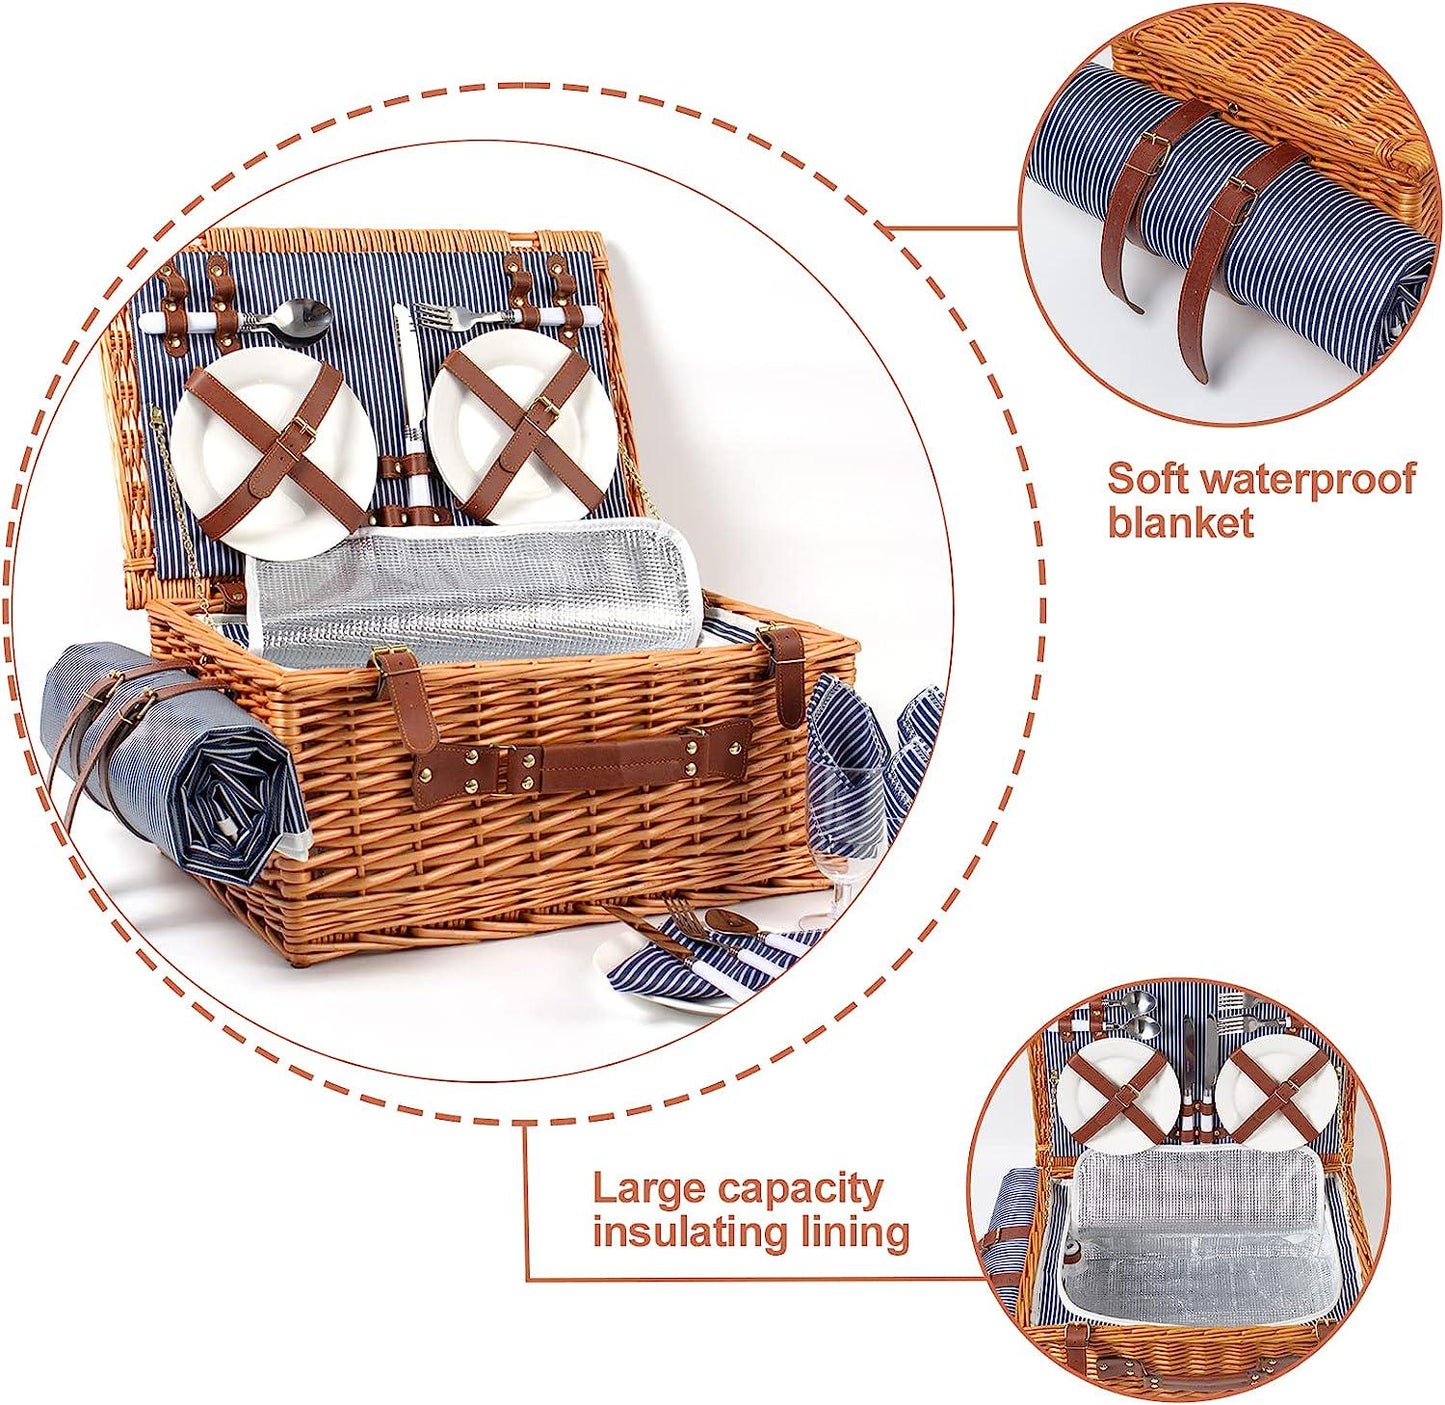 Wicker Picnic Basket for 4 Persons with Waterproof Picnic Blanket,Picnic Set for Family with Insulated Cooler Compartment Utensils,Wedding Gifts for Couples Unique